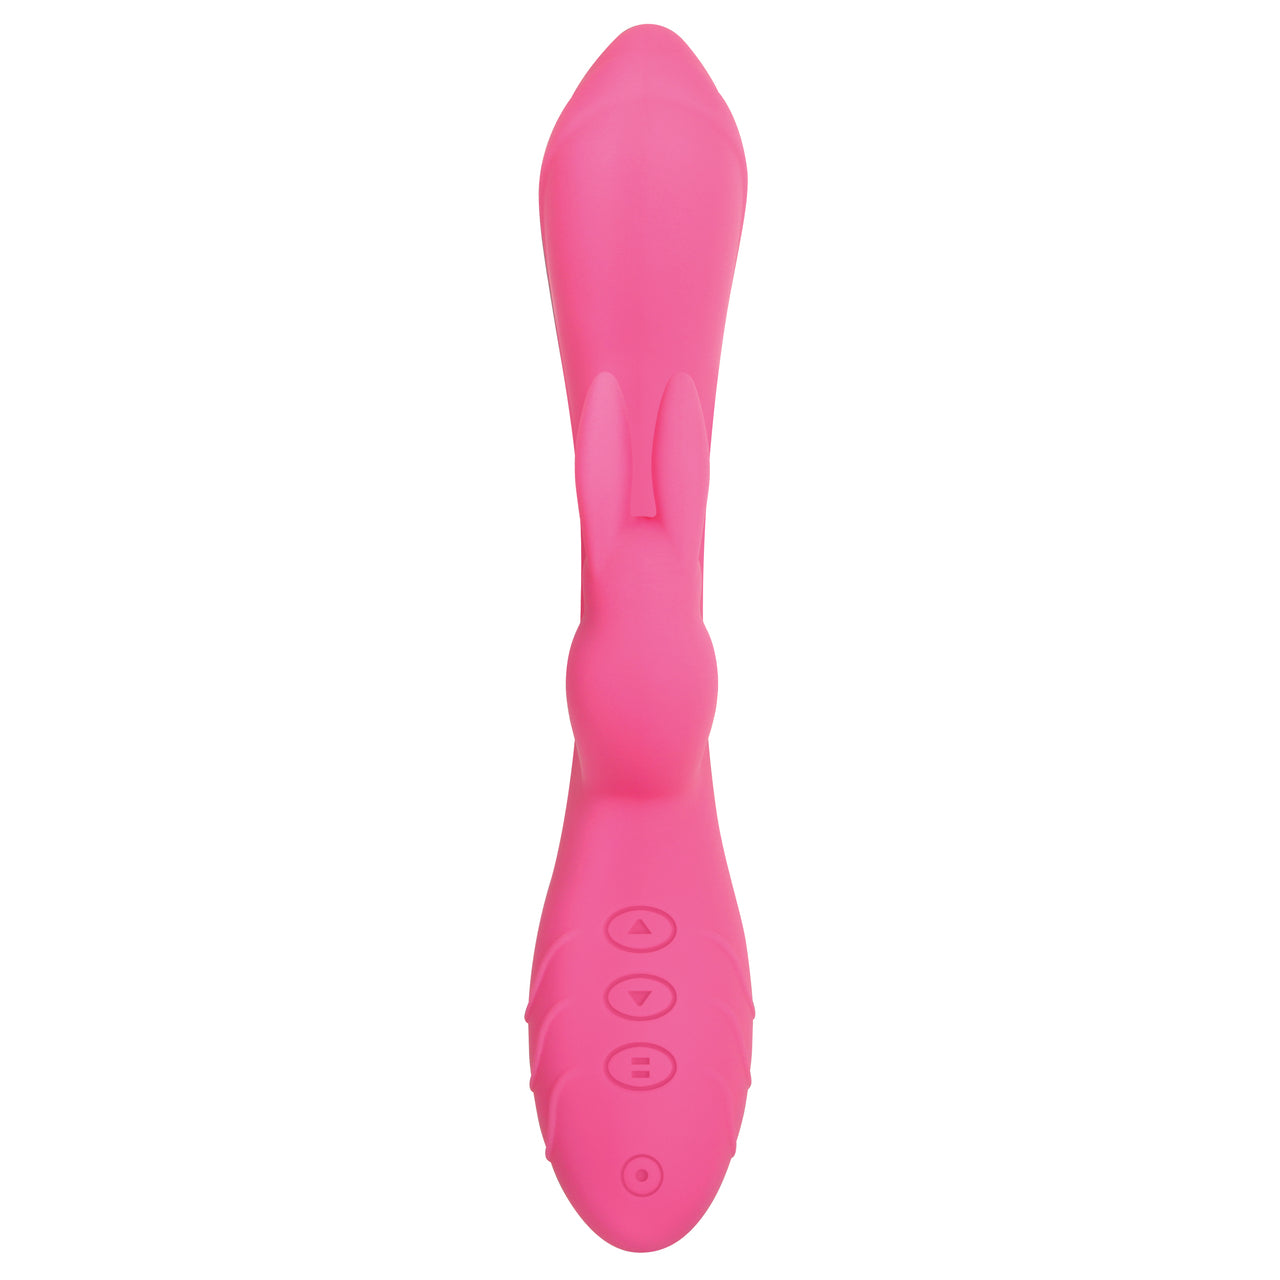 Evolved Bunny Kisses Rechargeable Silicone Vibrator - Pink